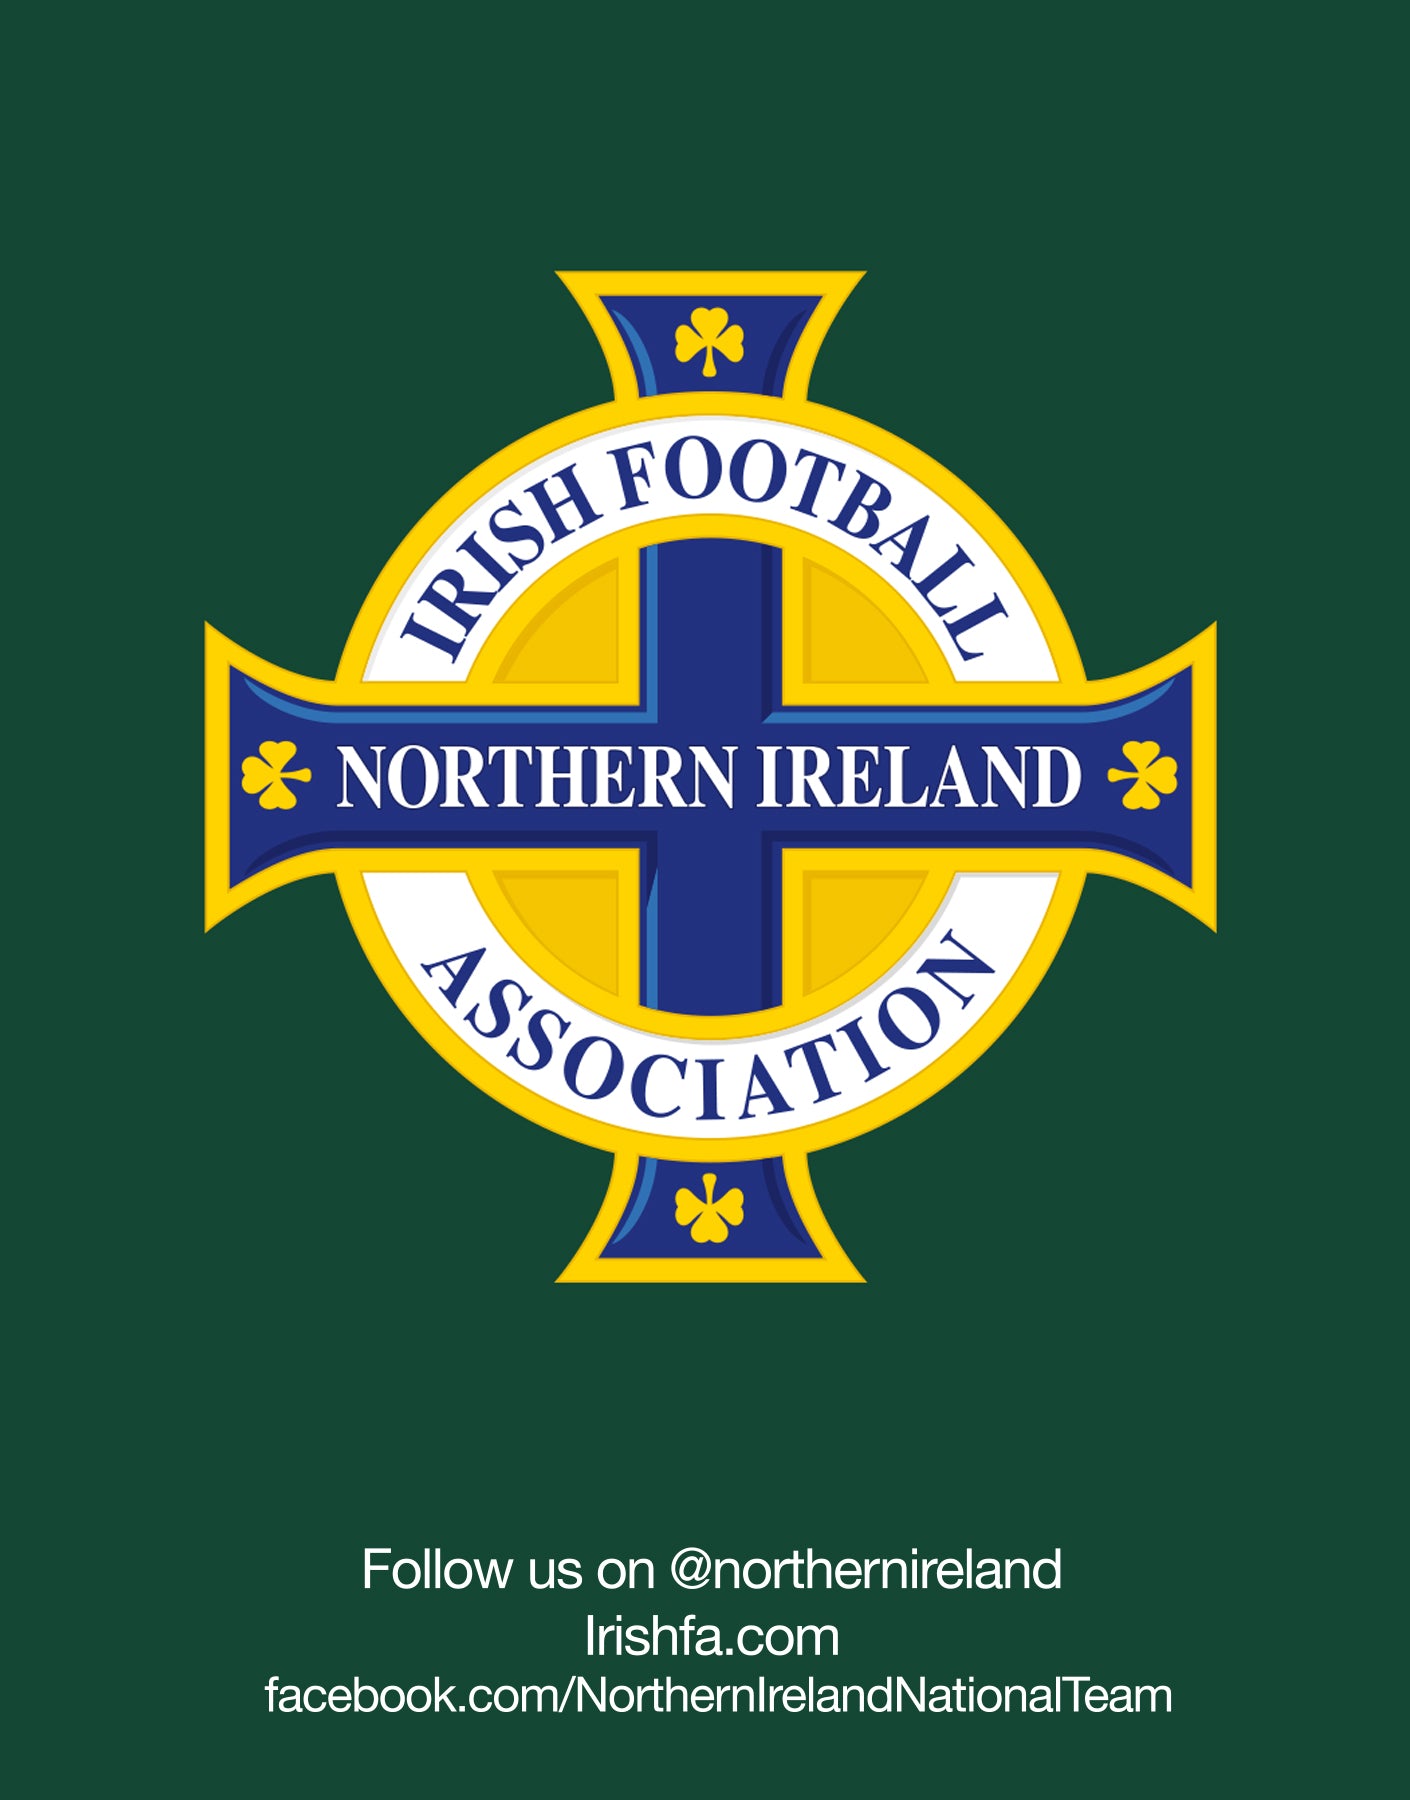 Official Northern Ireland Graphic T-Shirt - White - The World Football Store